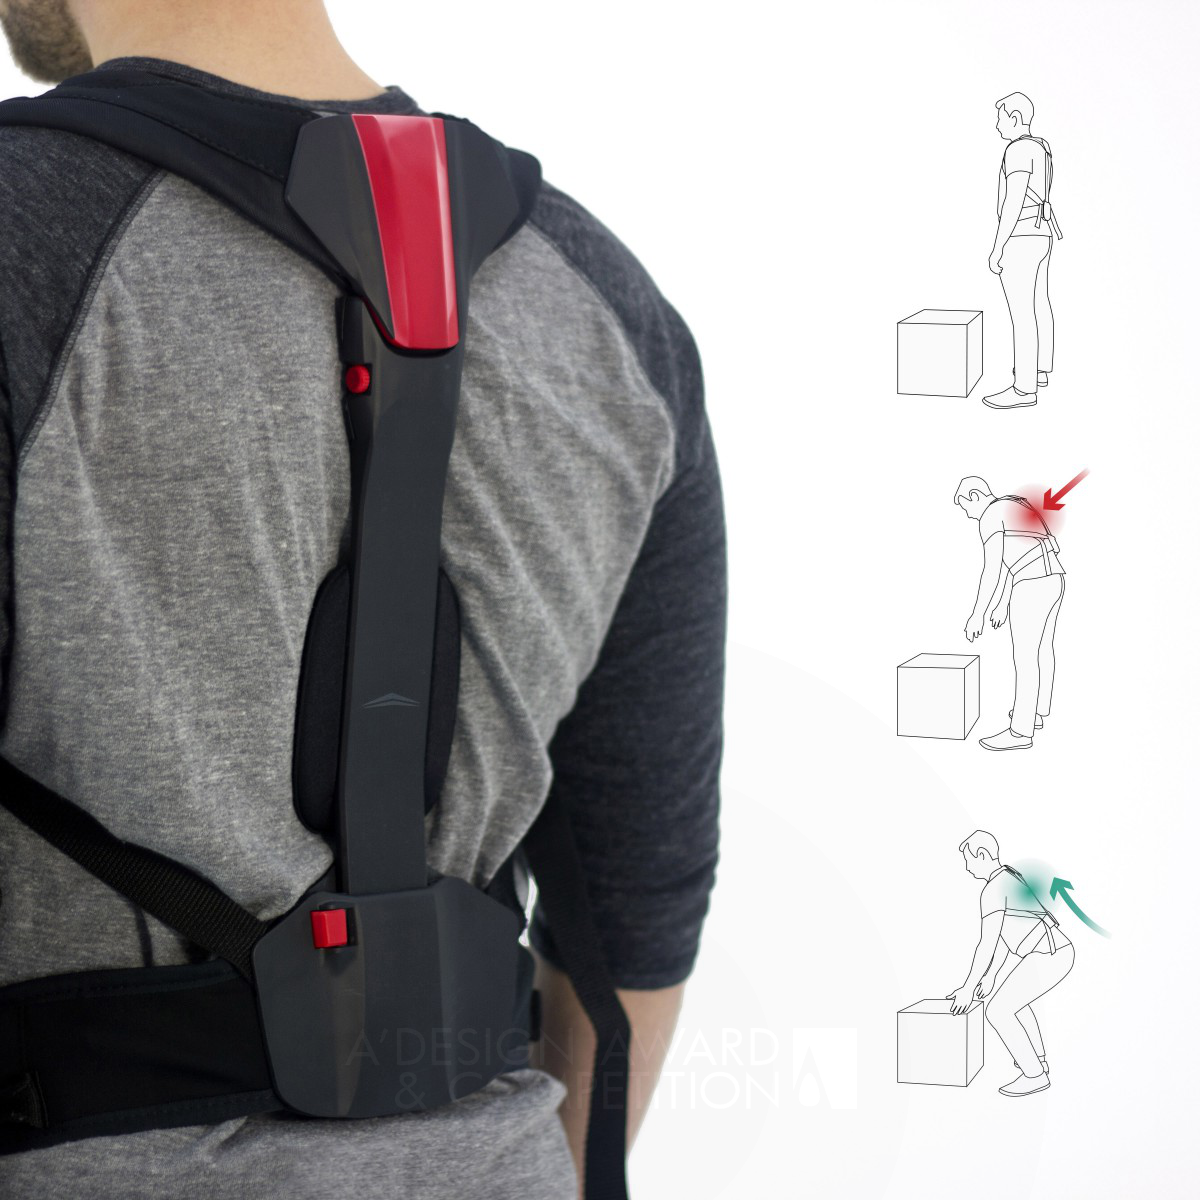 Strong Arm Technologies Inc. Postural Support Device